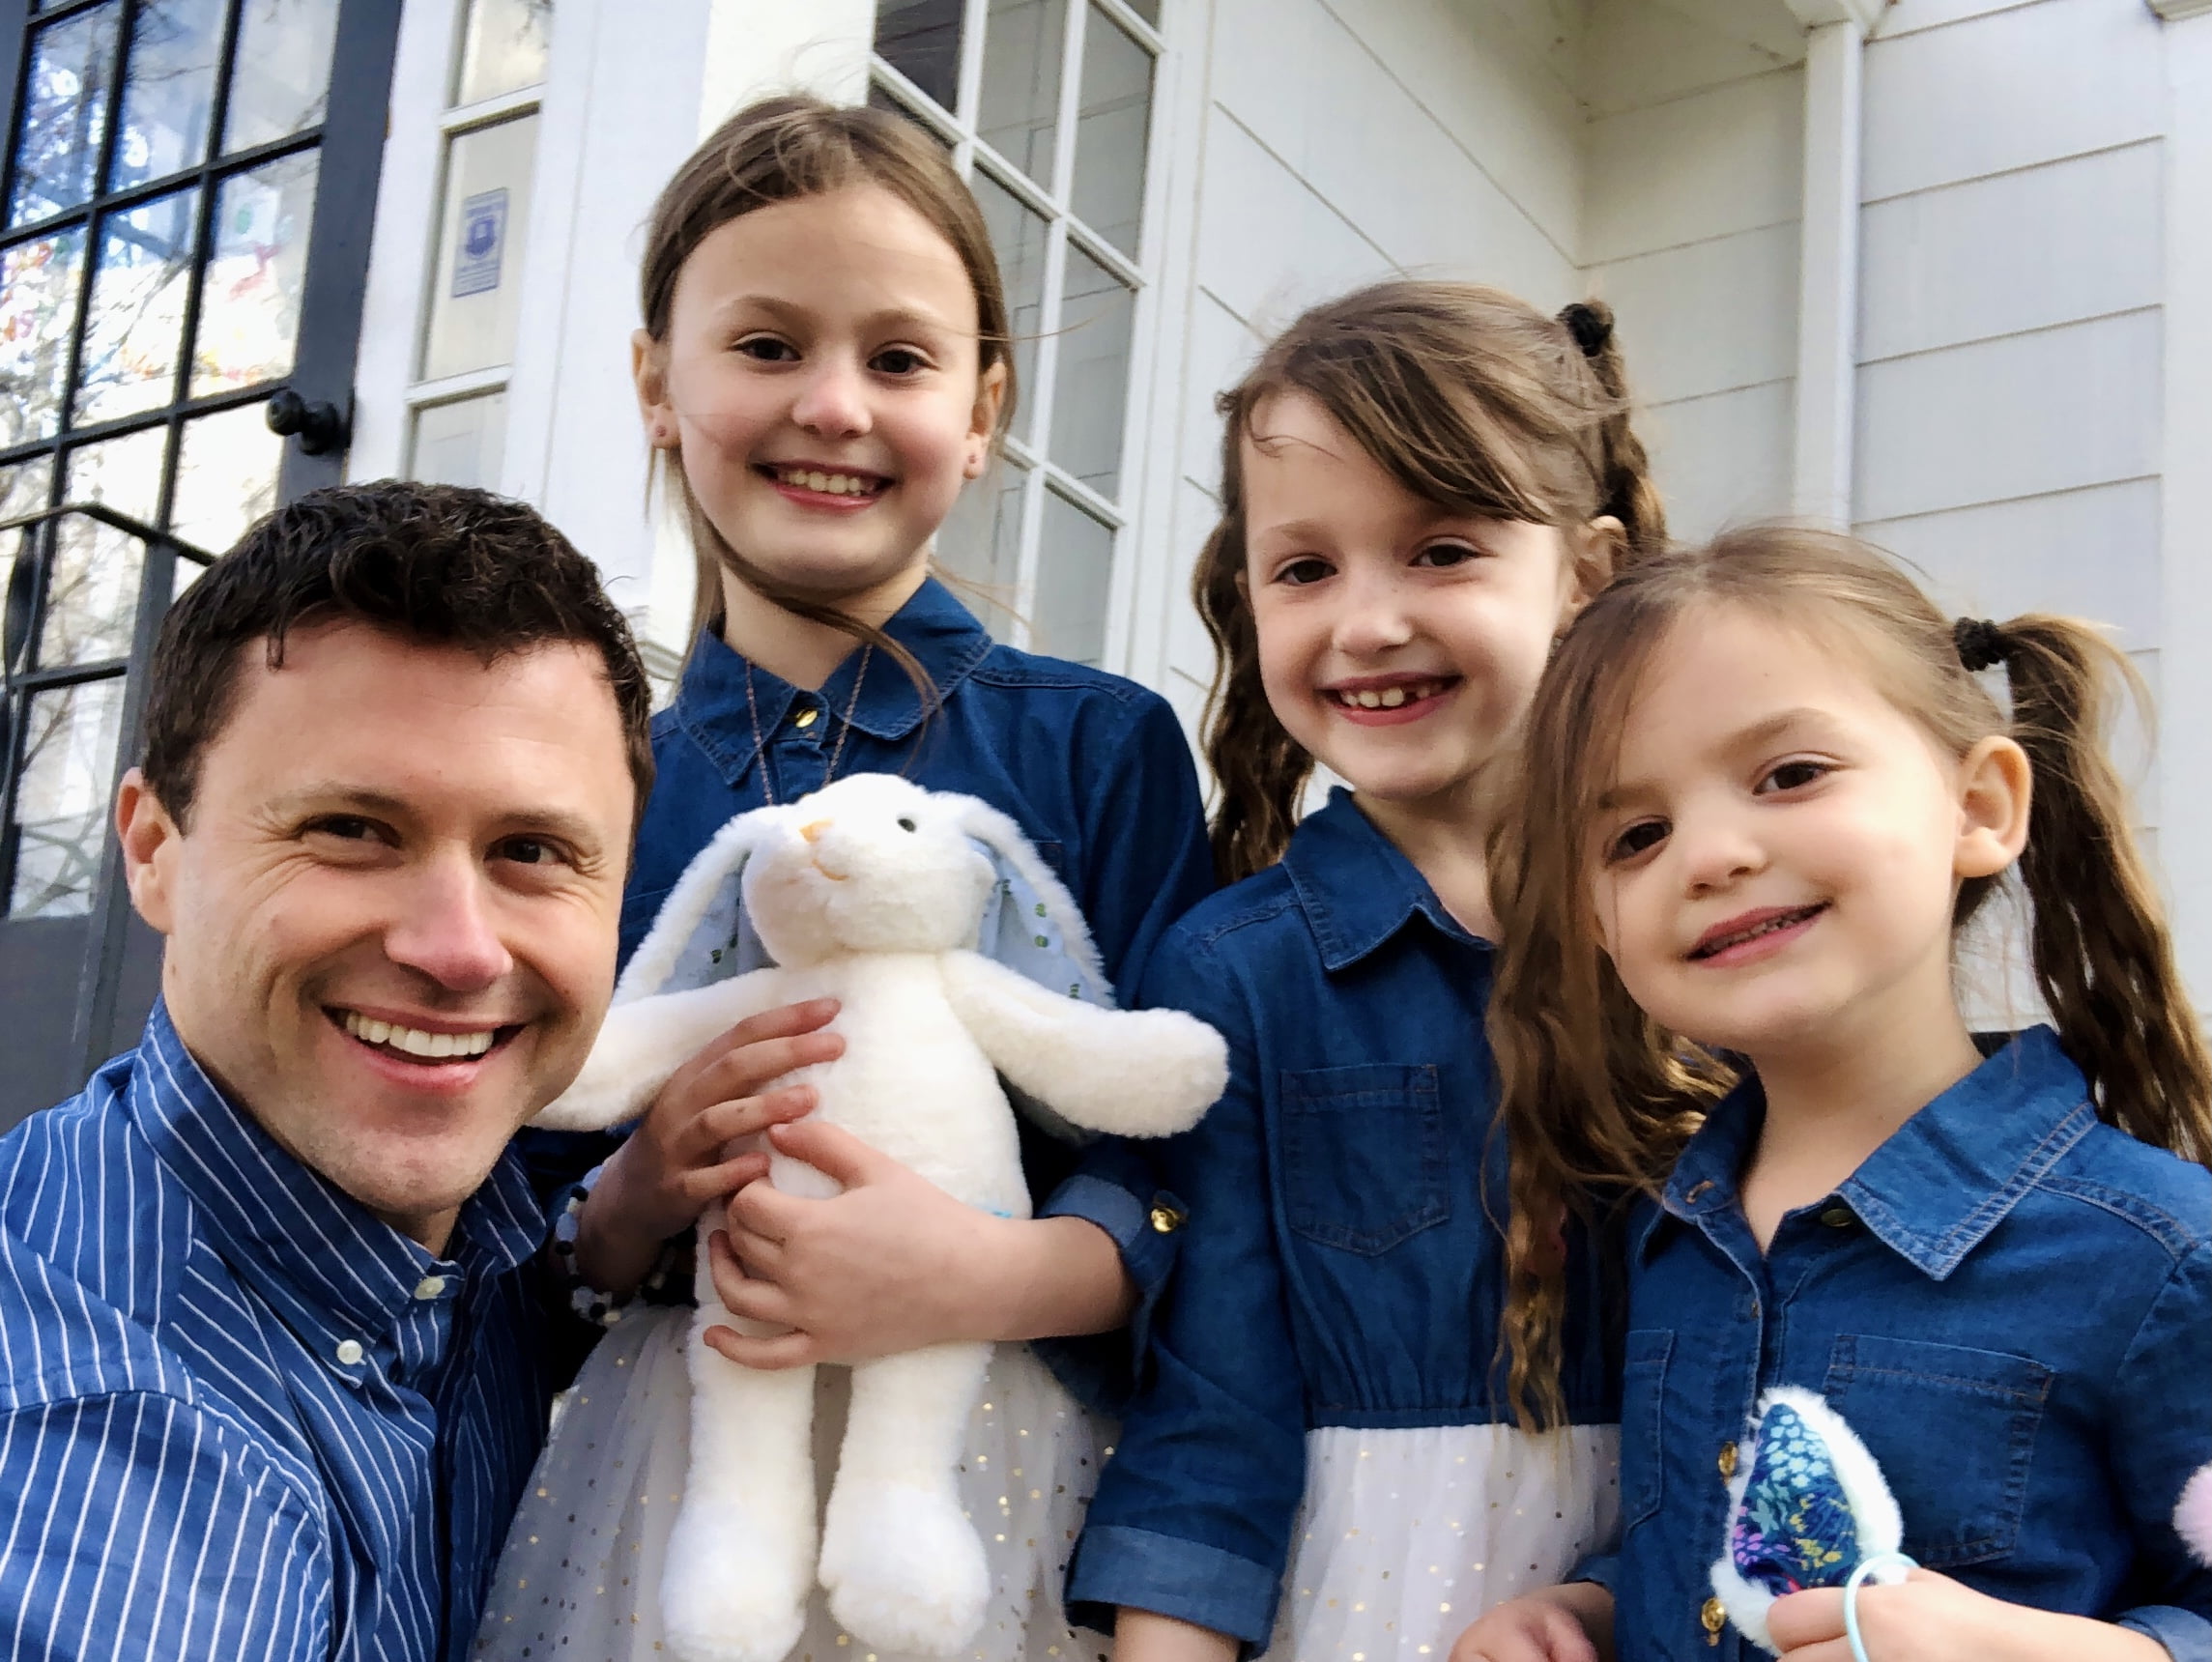 JC Cross with his daughters preparing for church on Easter